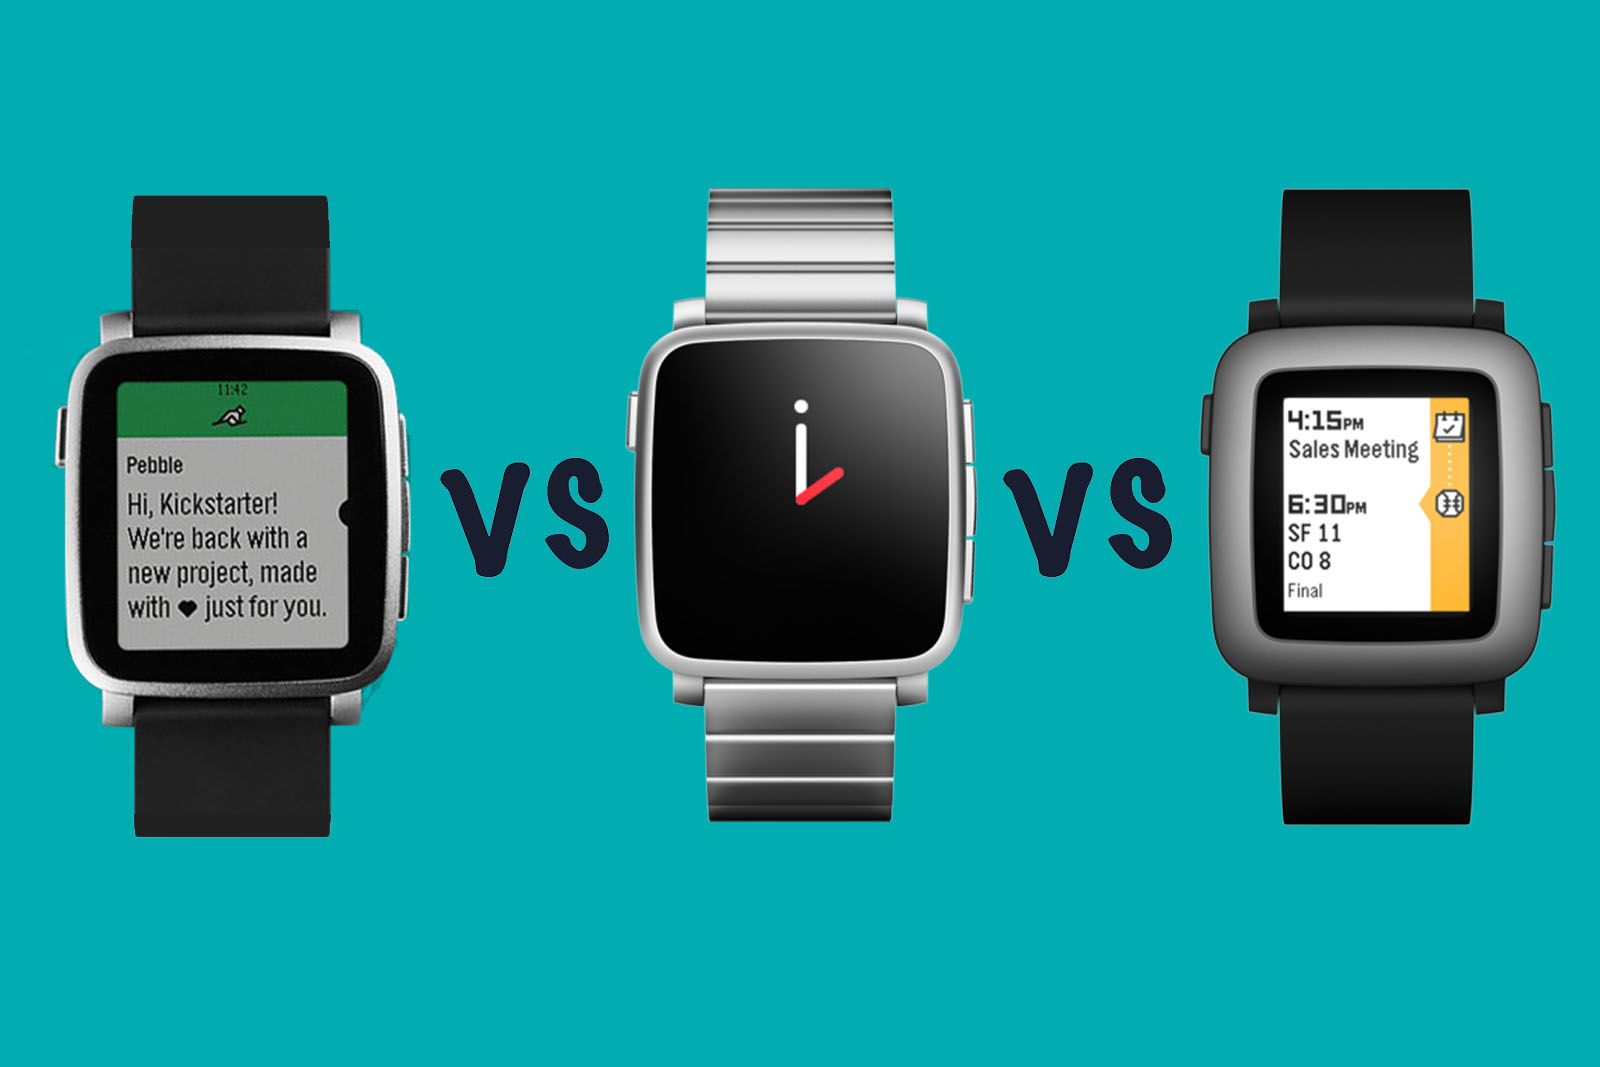 pebble time 2 vs time steel vs time what s the difference  image 1